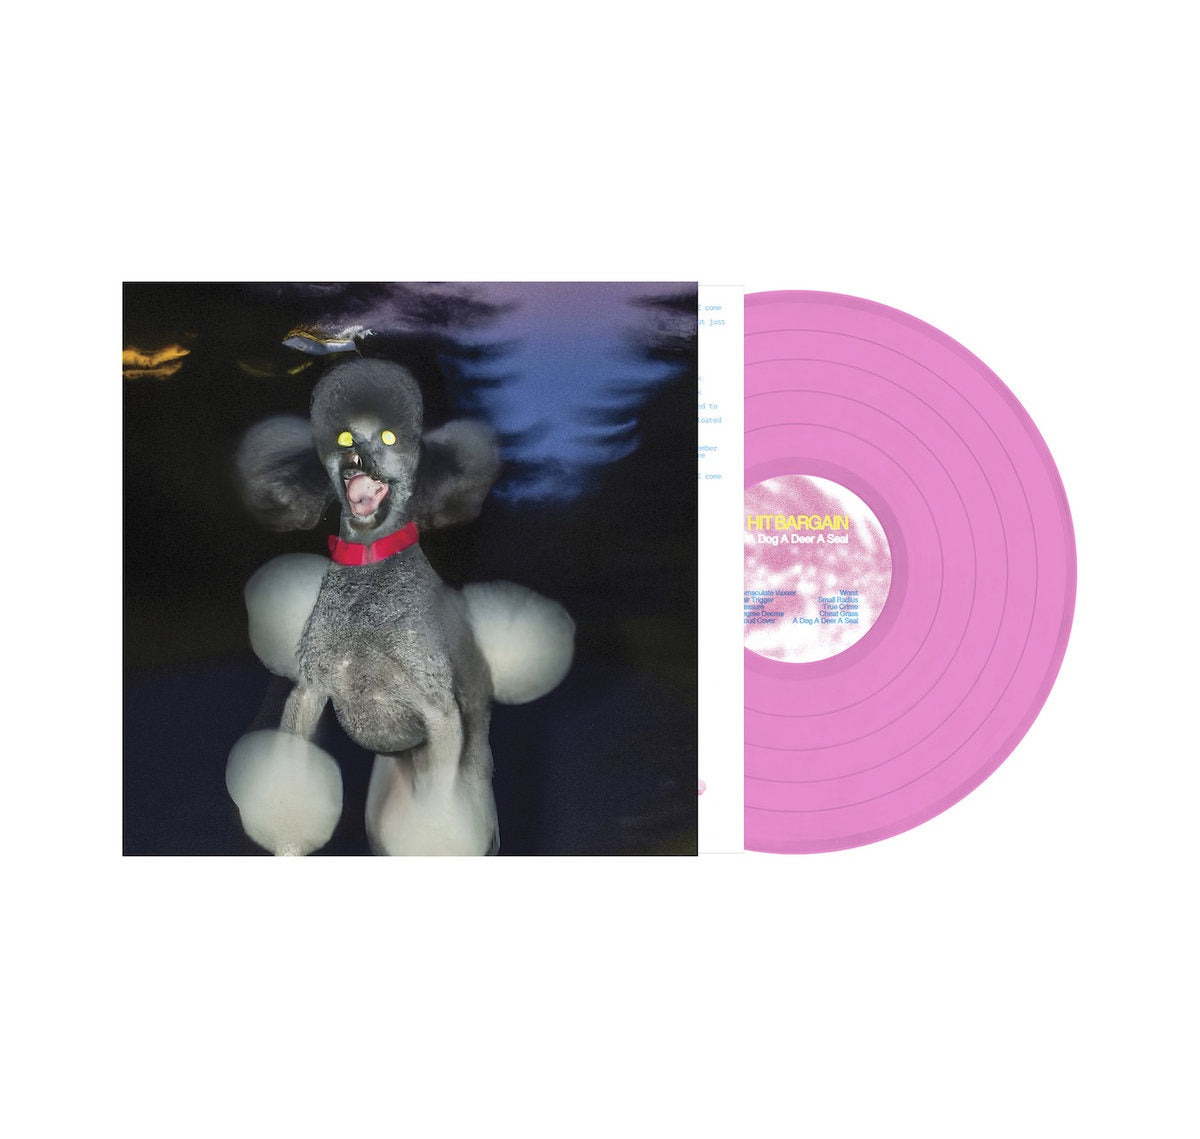 Hit Bargain – A DOG A DEER A SEAL - New LP Record Get Better Baby Pink Vinyl - Indie Rock / Post-Punk